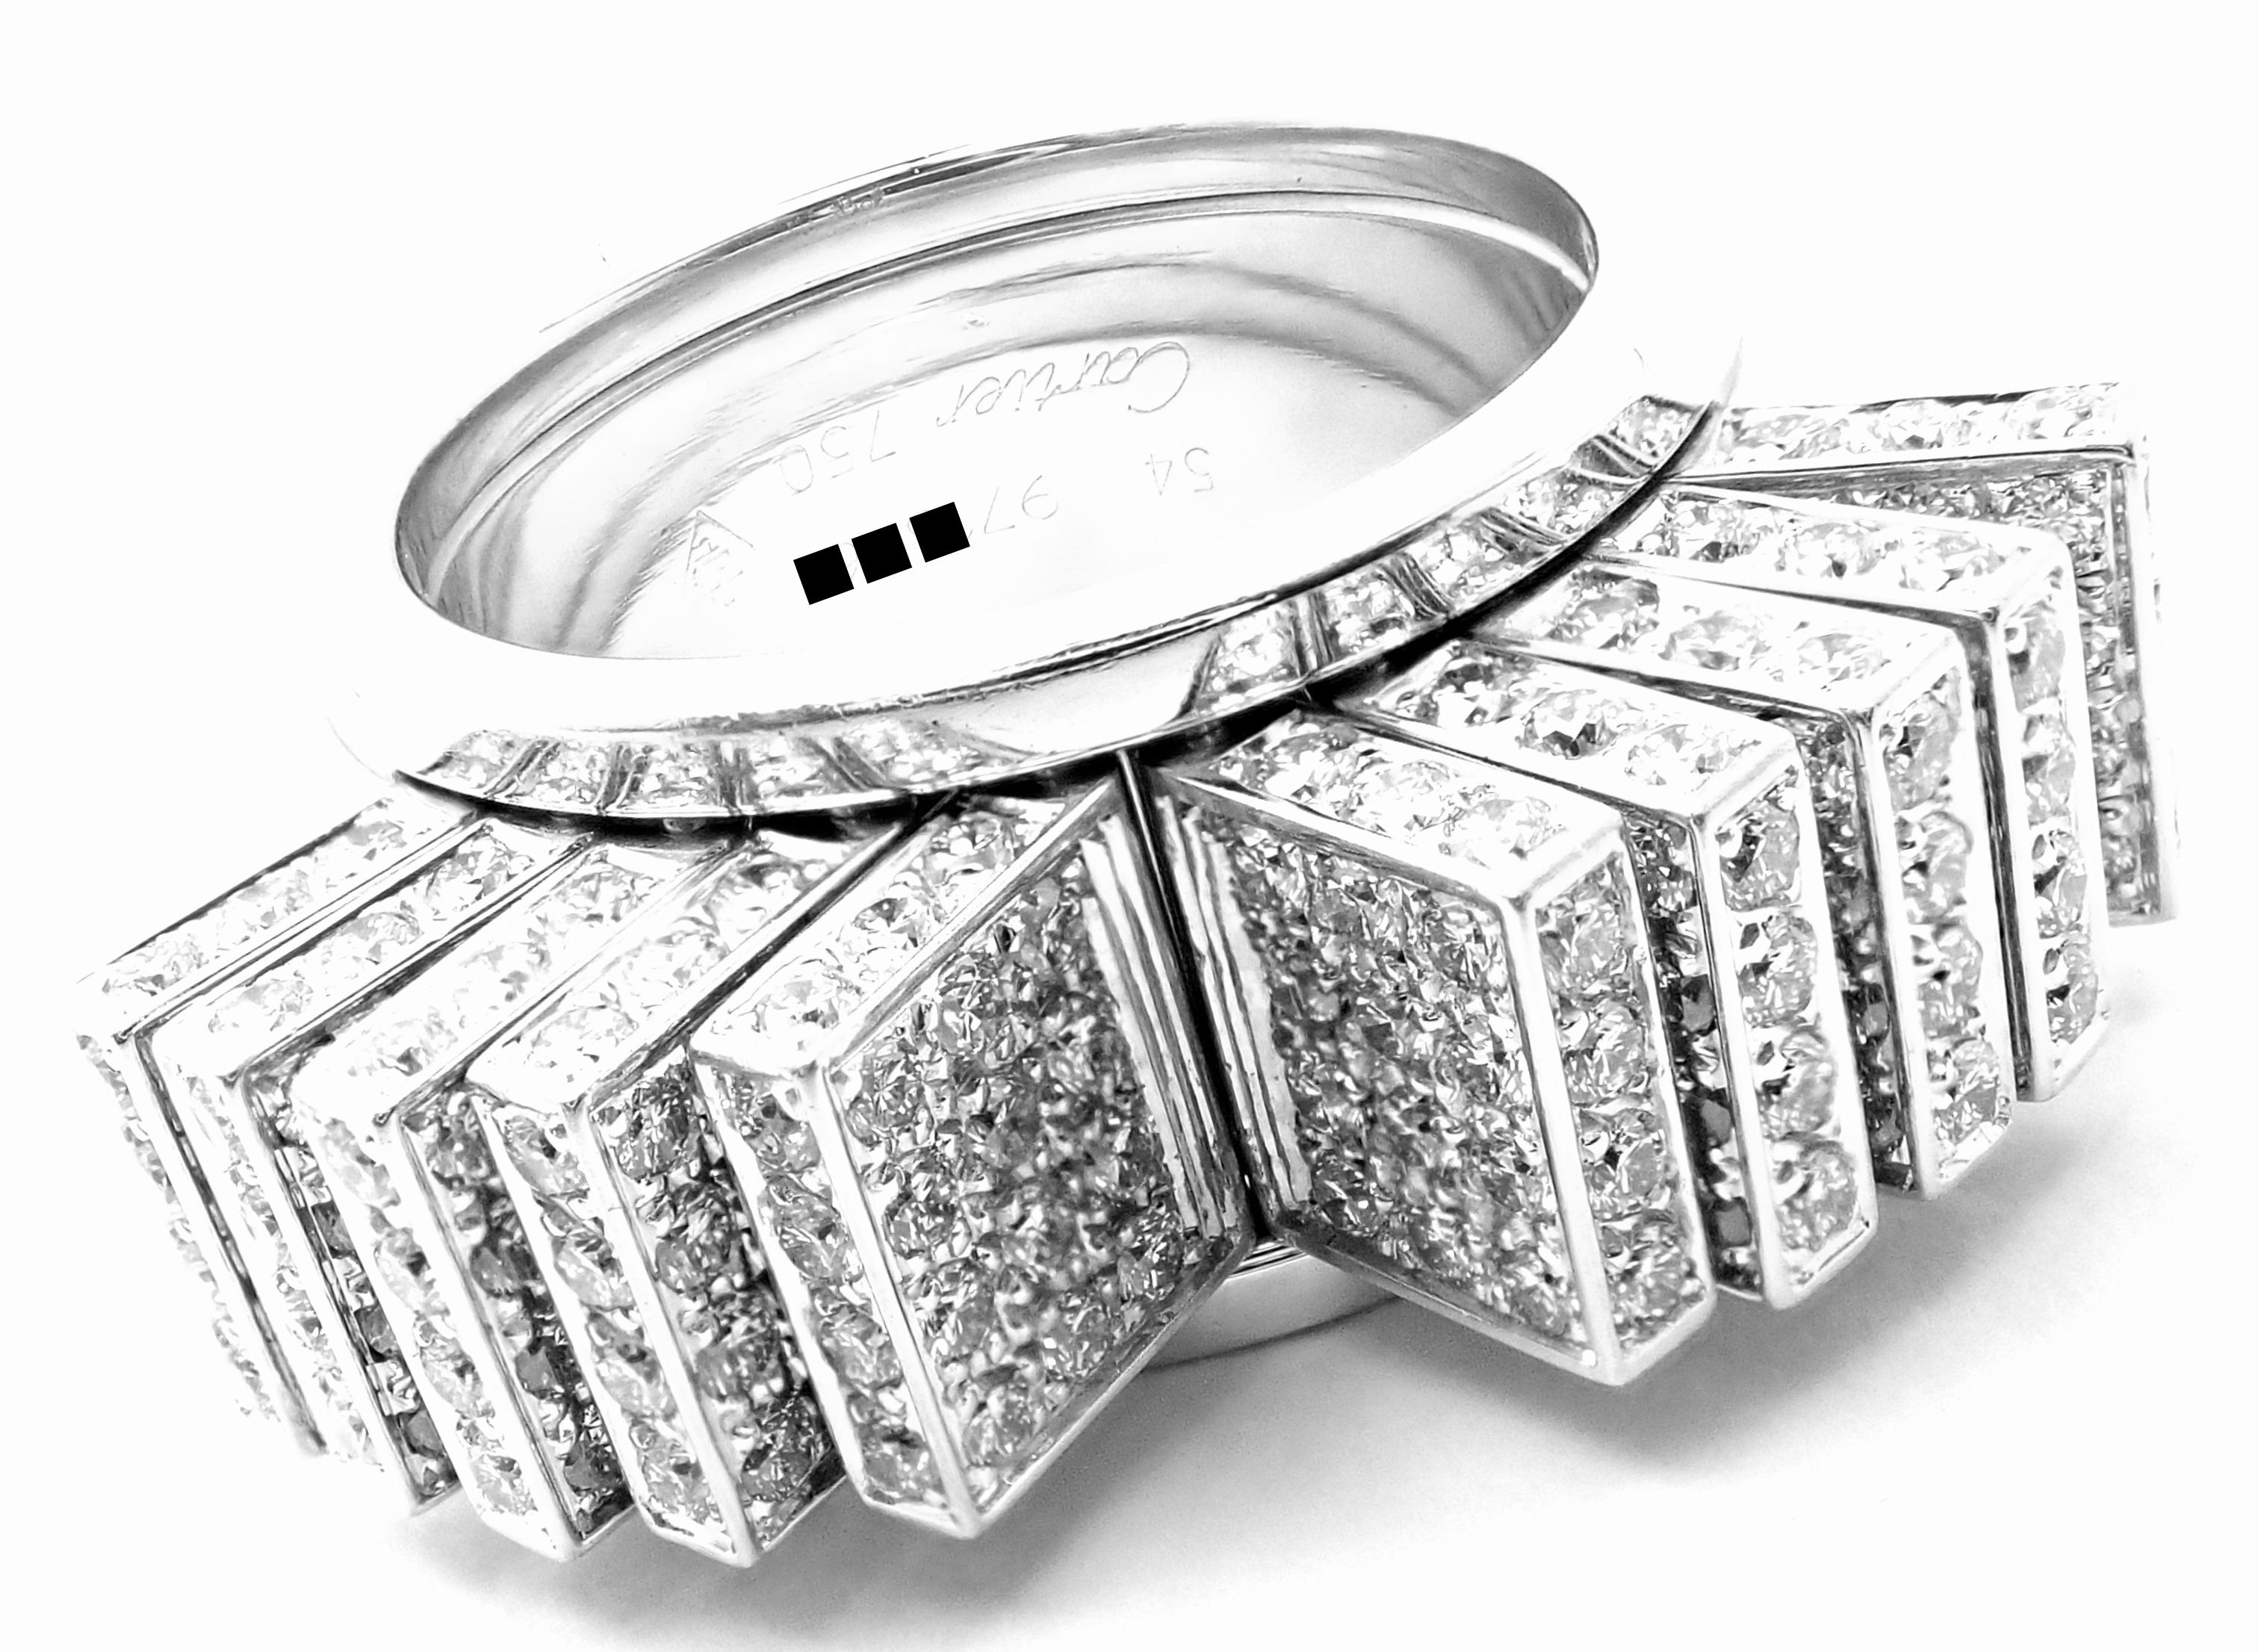 18k White Gold Diamond Fan Ring by Cartier.   
With 340 Round brilliant cut diamonds VVS1 clarity, E color total weight approximately 4.25ct
This ring comes with original Cartier box and Cartier valuation report dated May 2018.
Details: 
Ring Size: